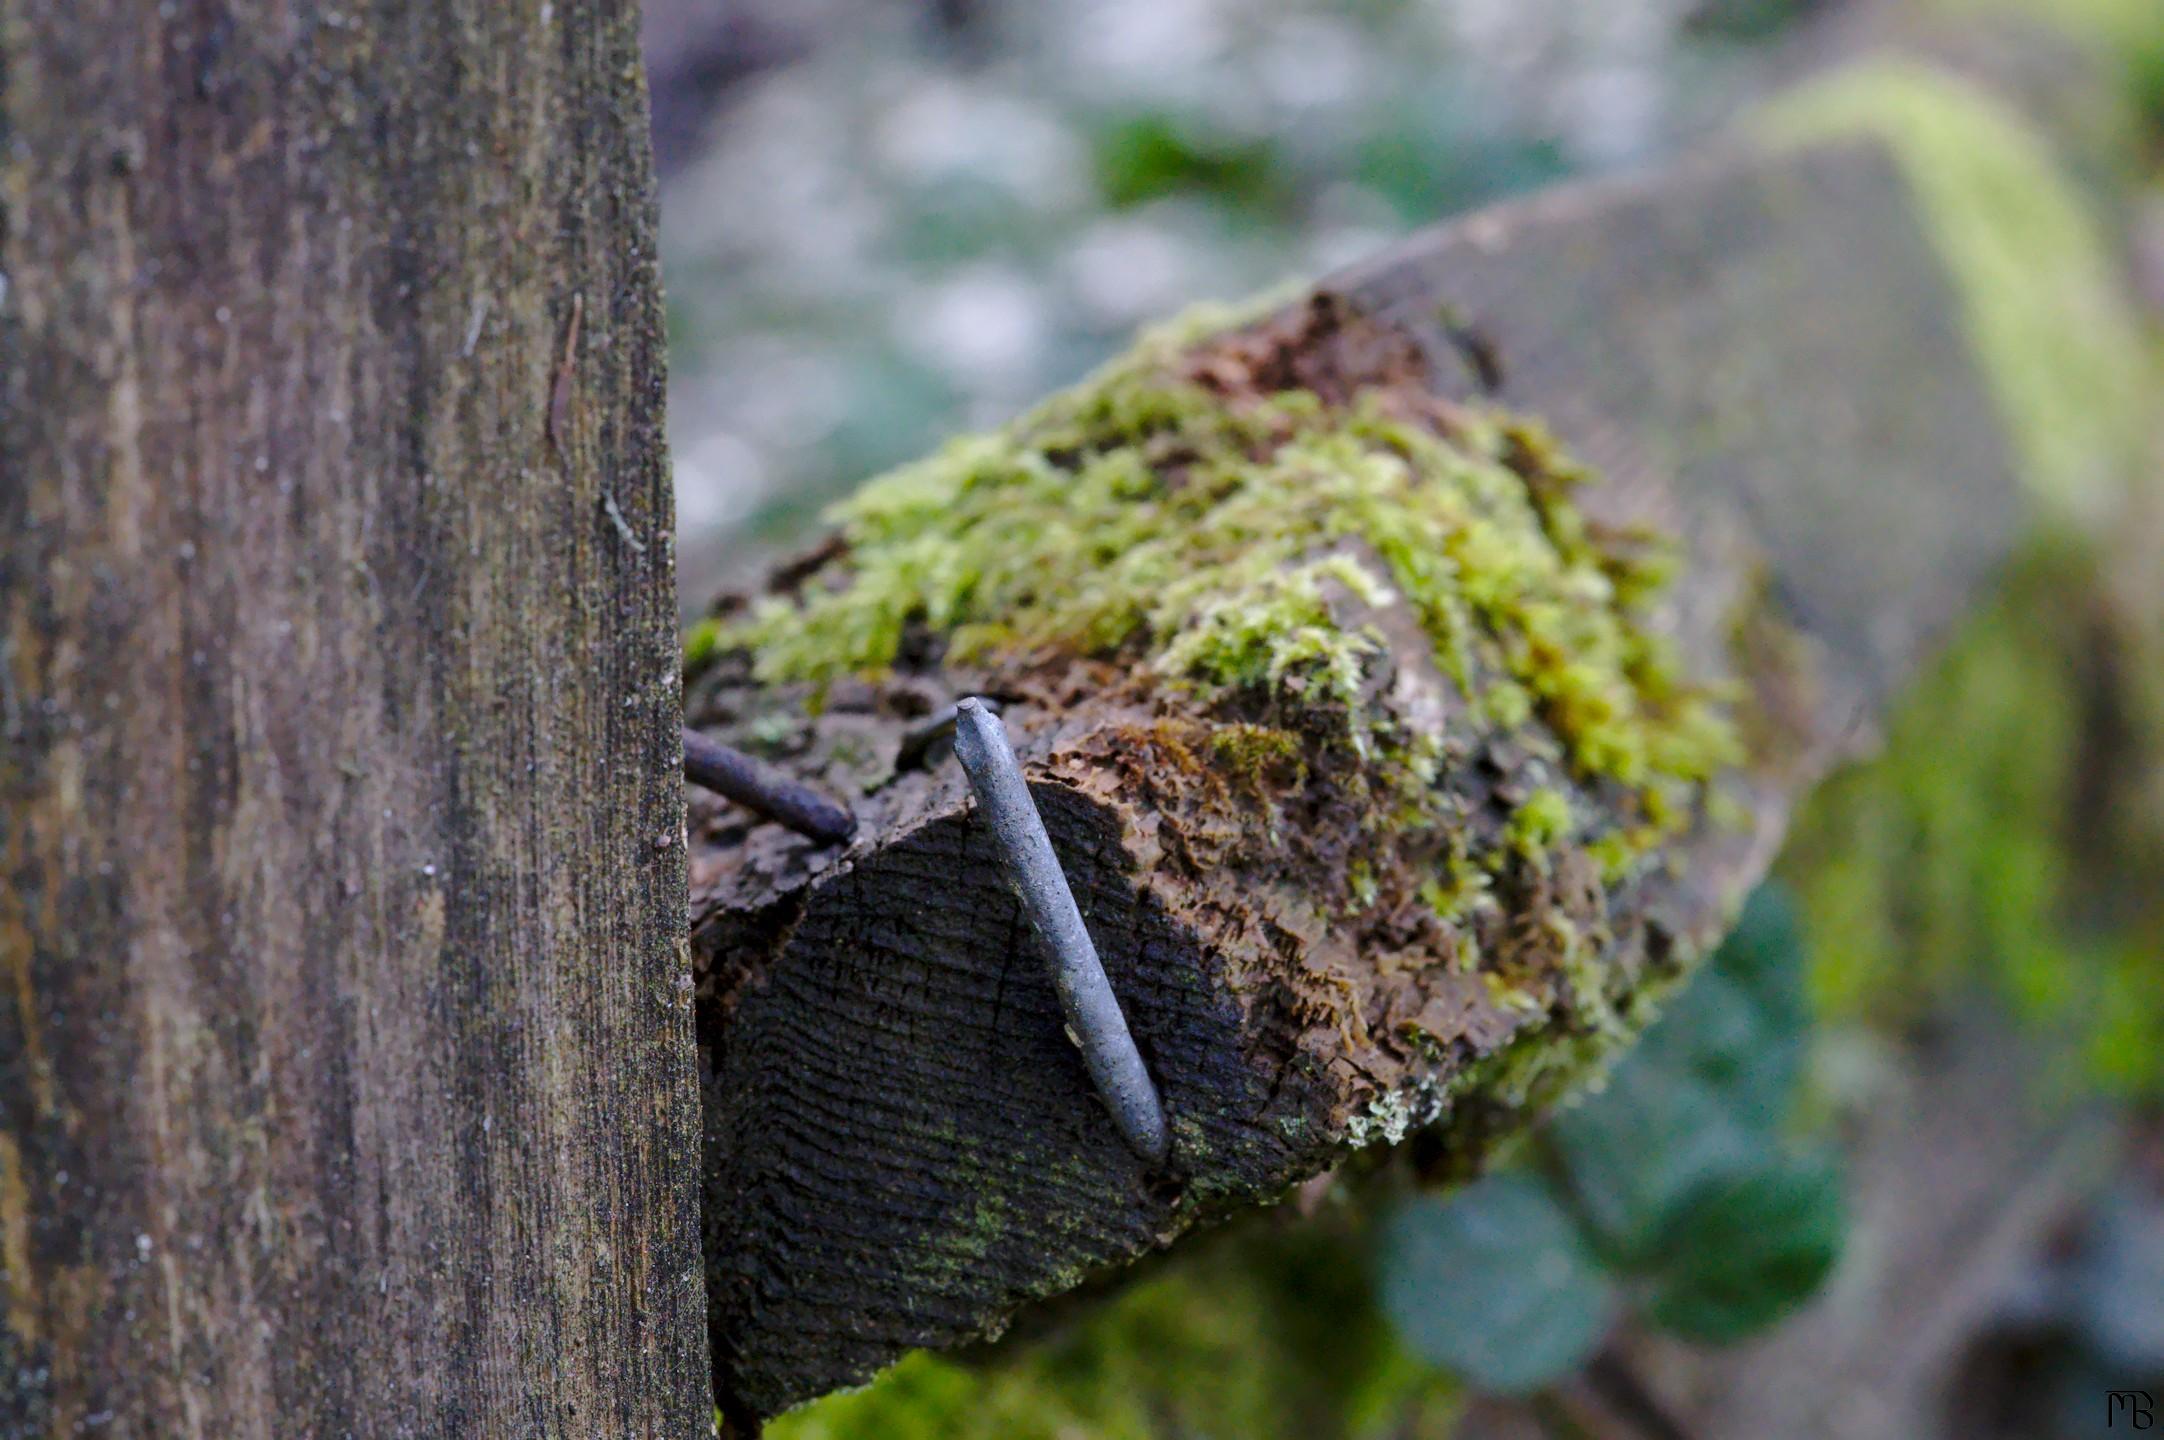 Nail and green lichen on wooden fence